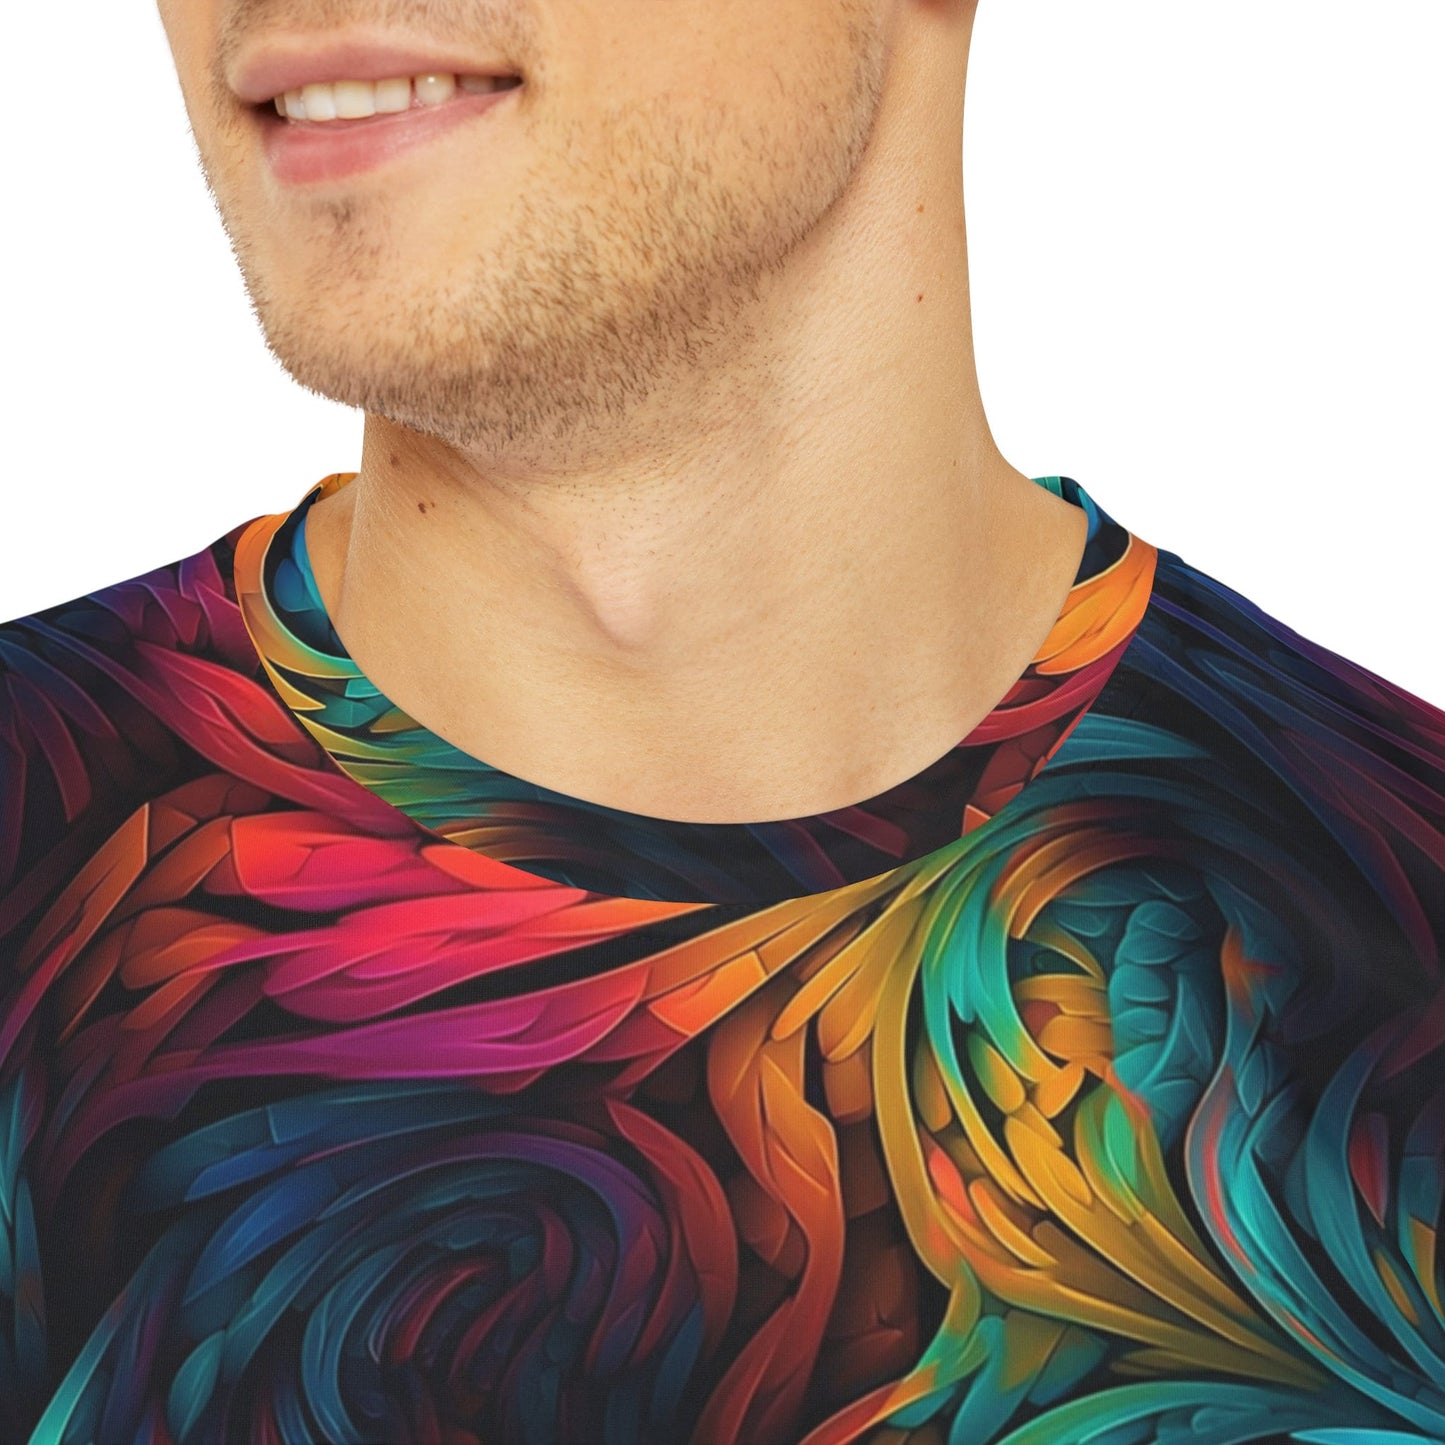 Sublimated T Shirt for Festivals, Raves, Events | Men's Streetwear, Heady, Trippy T-Shirt, Sublimated T-Shirt, Rave Wear